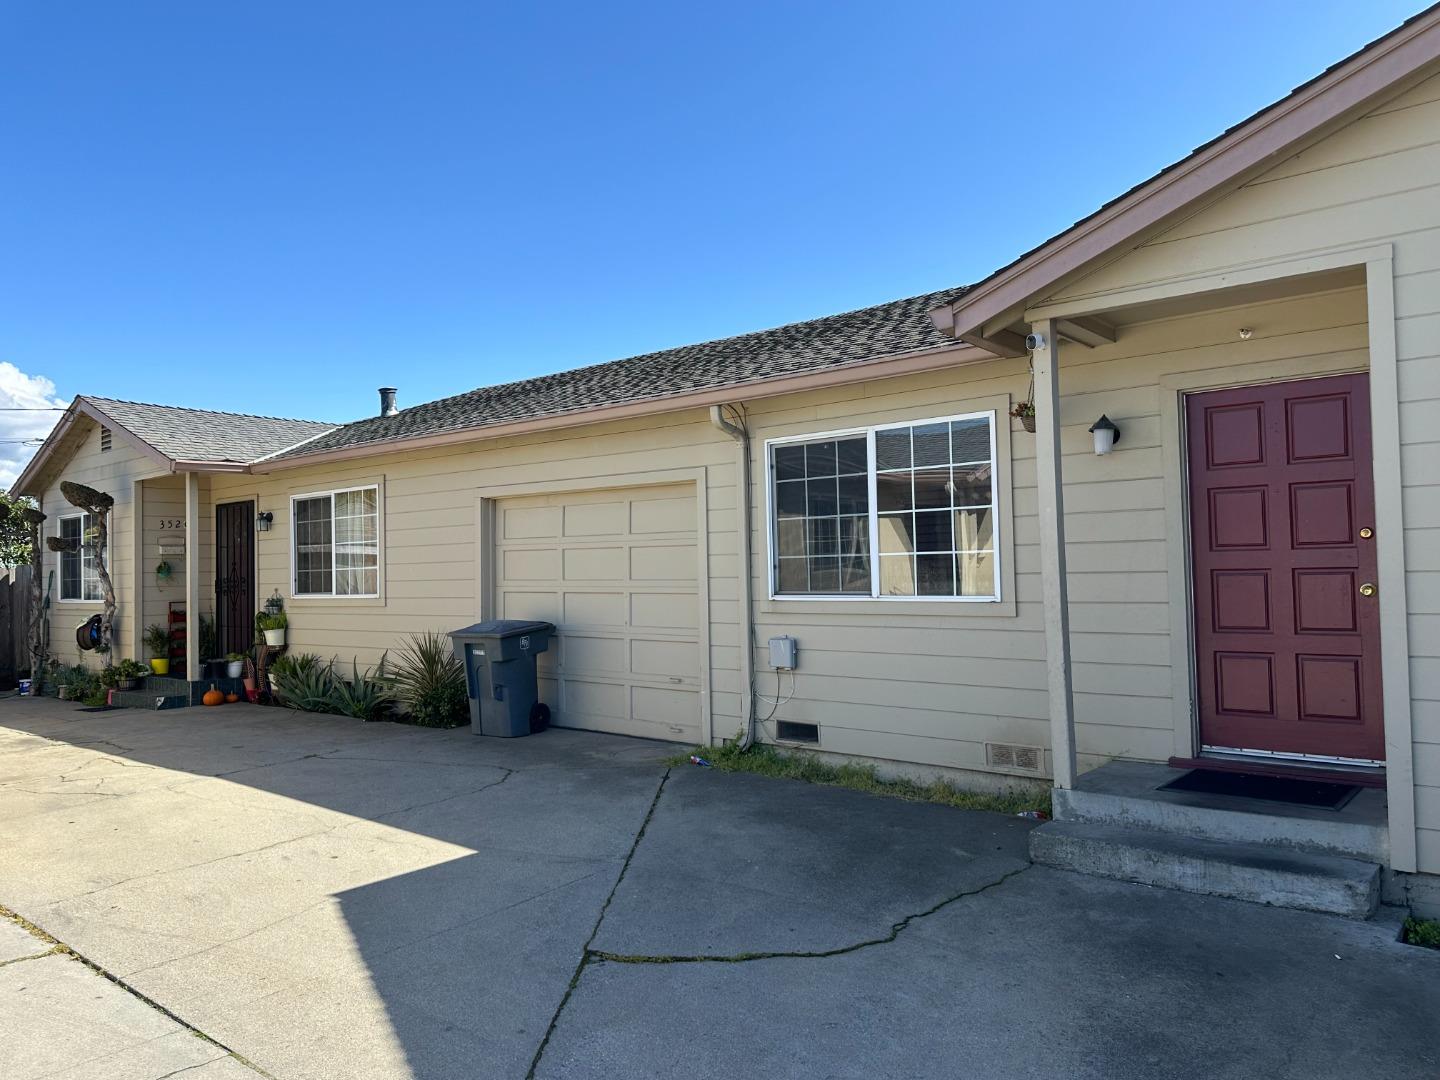 Photo of 352 Williams Rd in Salinas, CA